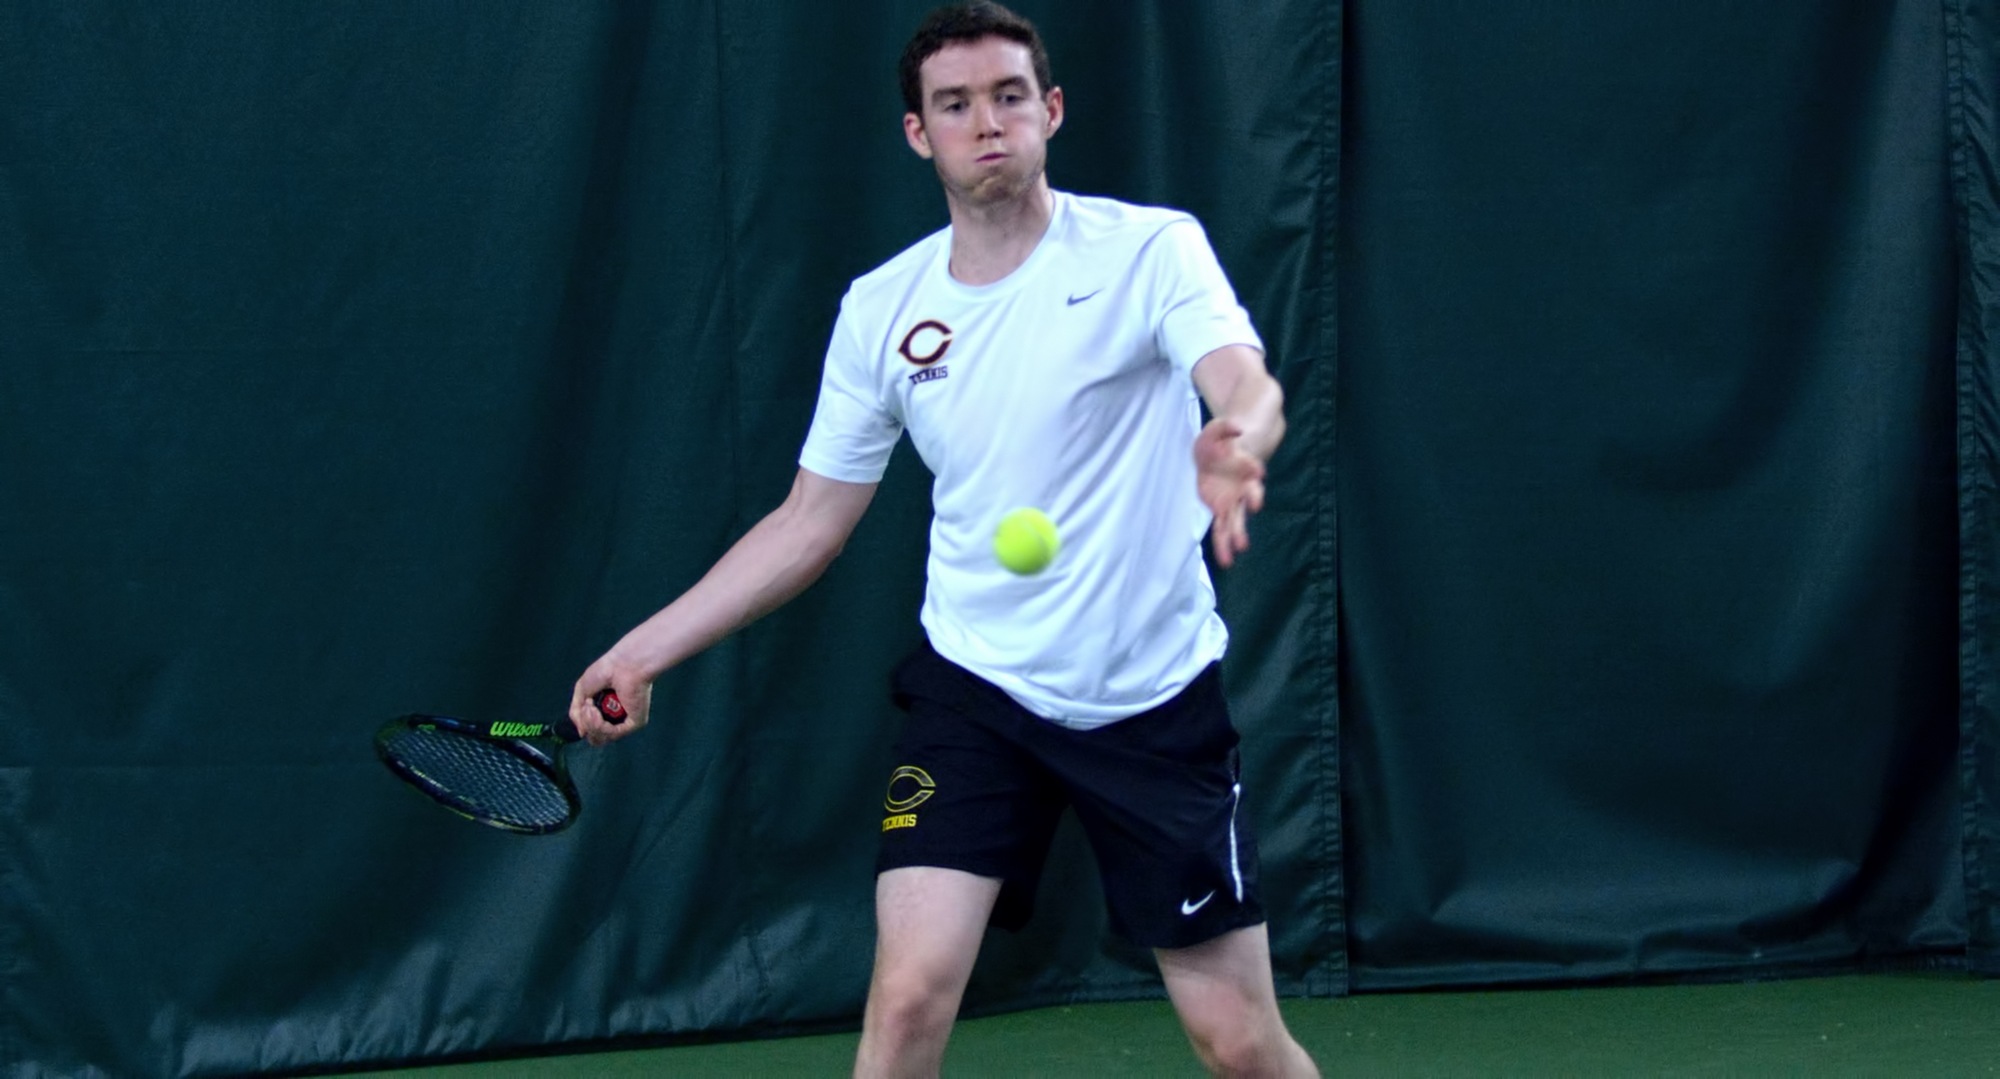 Freshman Erik Porter won his No.2 doubles match 8-2 and then cruised to a 6-4, 6-2 win at No.3 singles in the Cobbers' 9-0 victory over Northwestern.